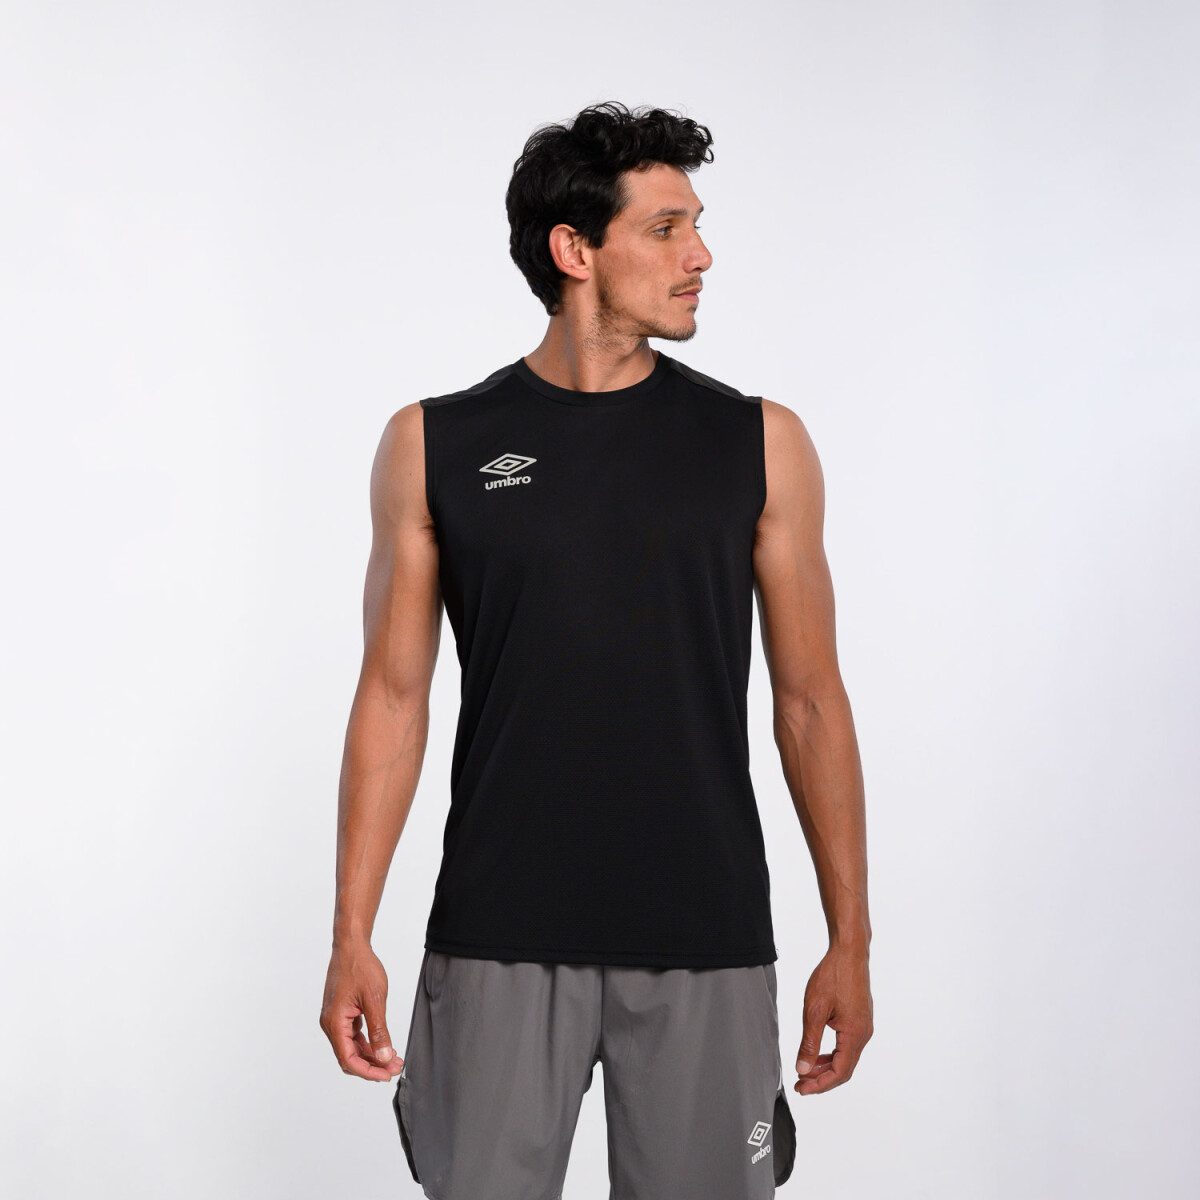 Musculosa Combined Hole Umbro Hombre - 225 